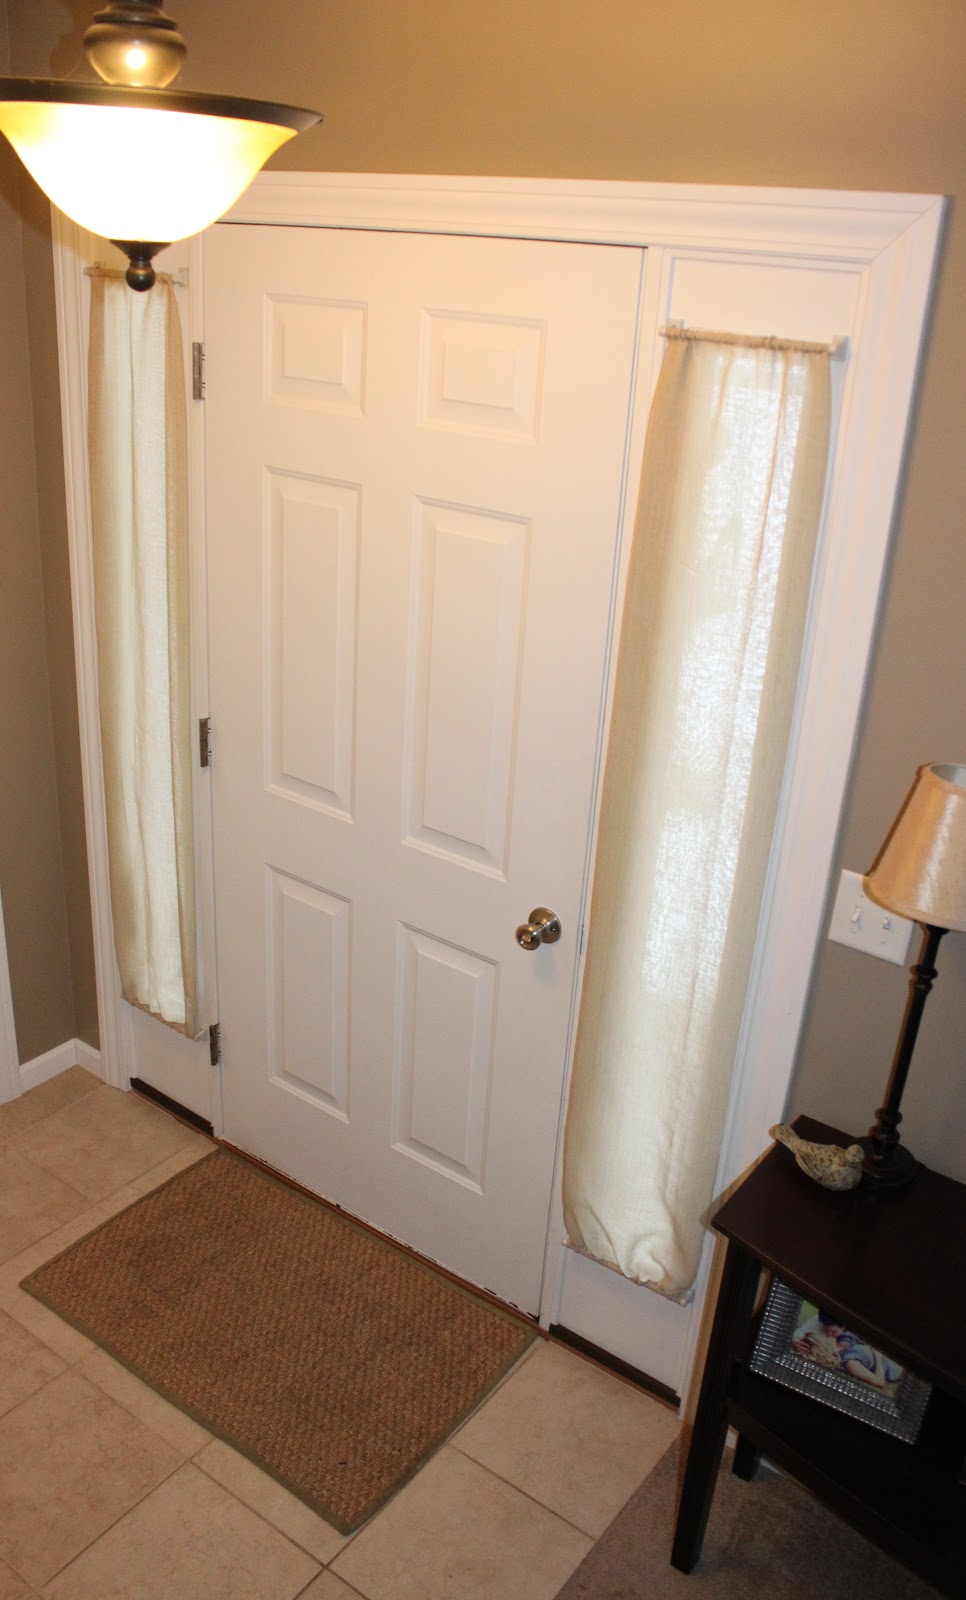 Small Window Curtains For Front Door 